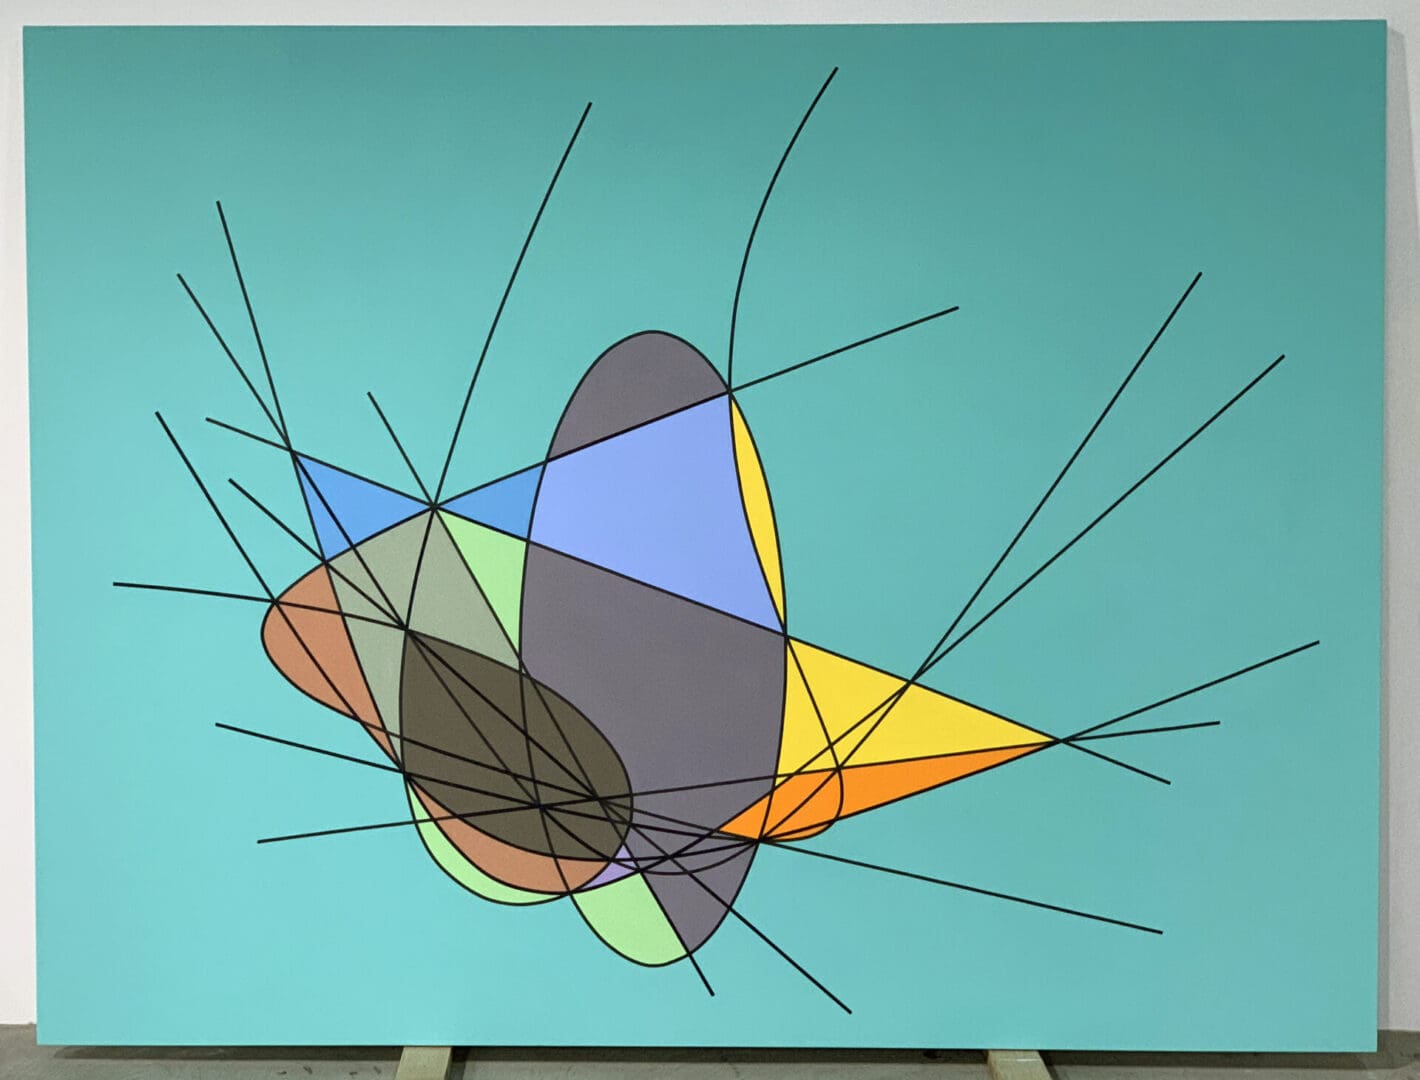 Clifford Singer Cut Space Series #40. 2006 - 2019. Acrylic on Canvas on wood stretcher. 72 x 94 x 1 inches